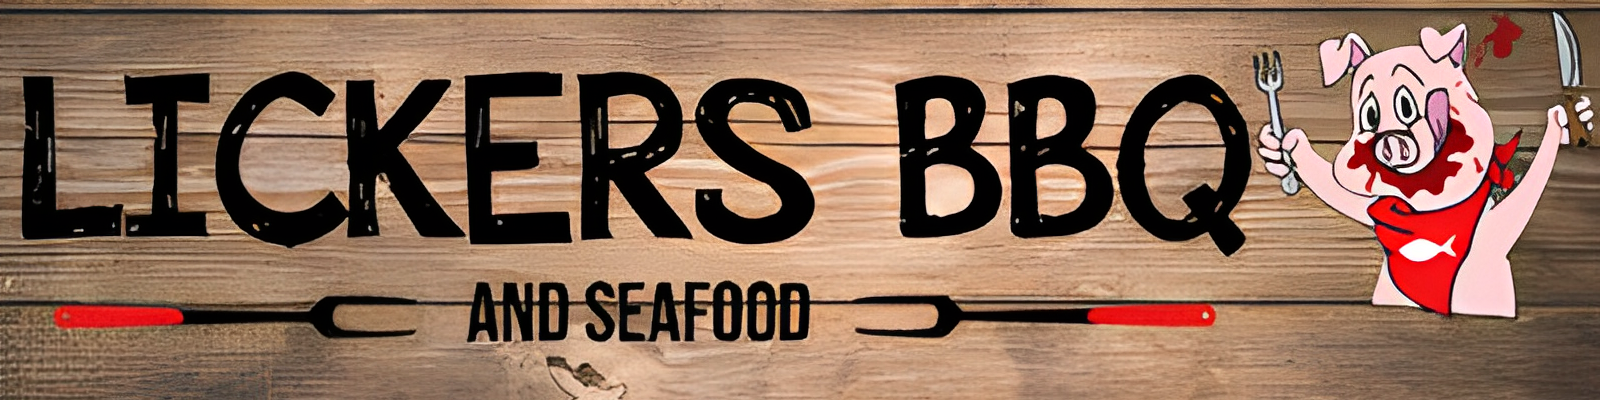 Lickers BBQ & Seafood